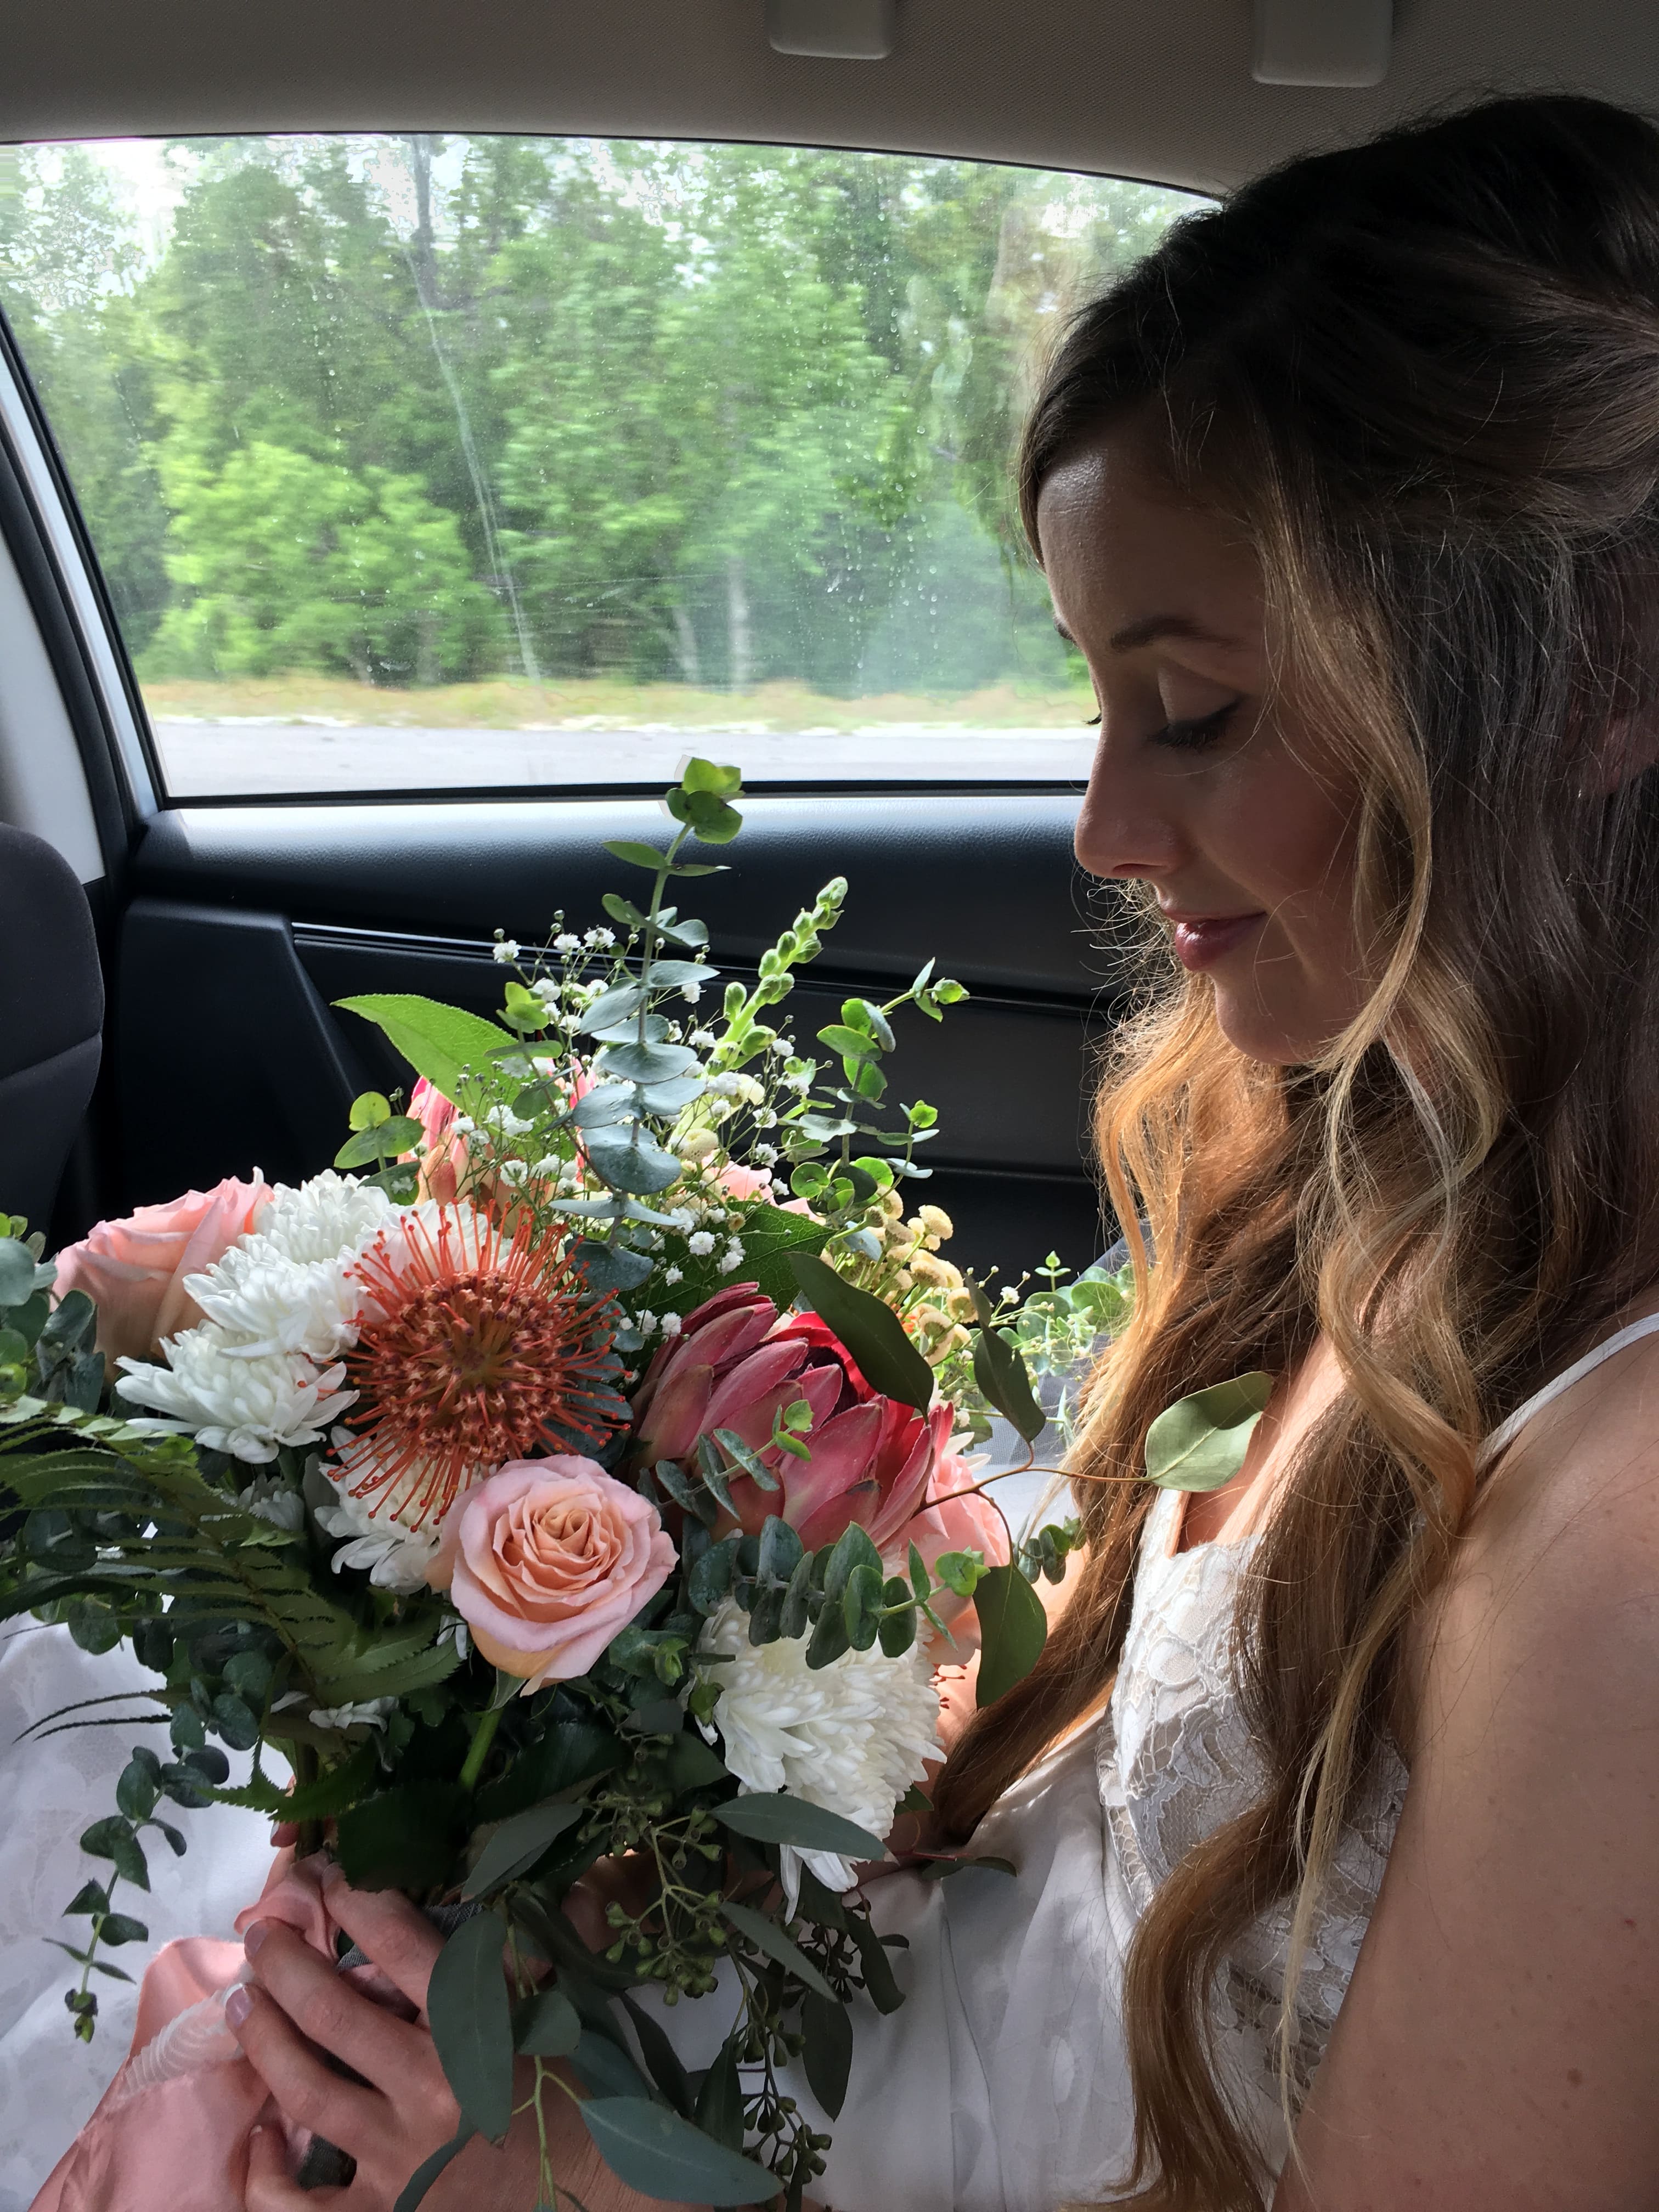 Woman holding bouquet in the car